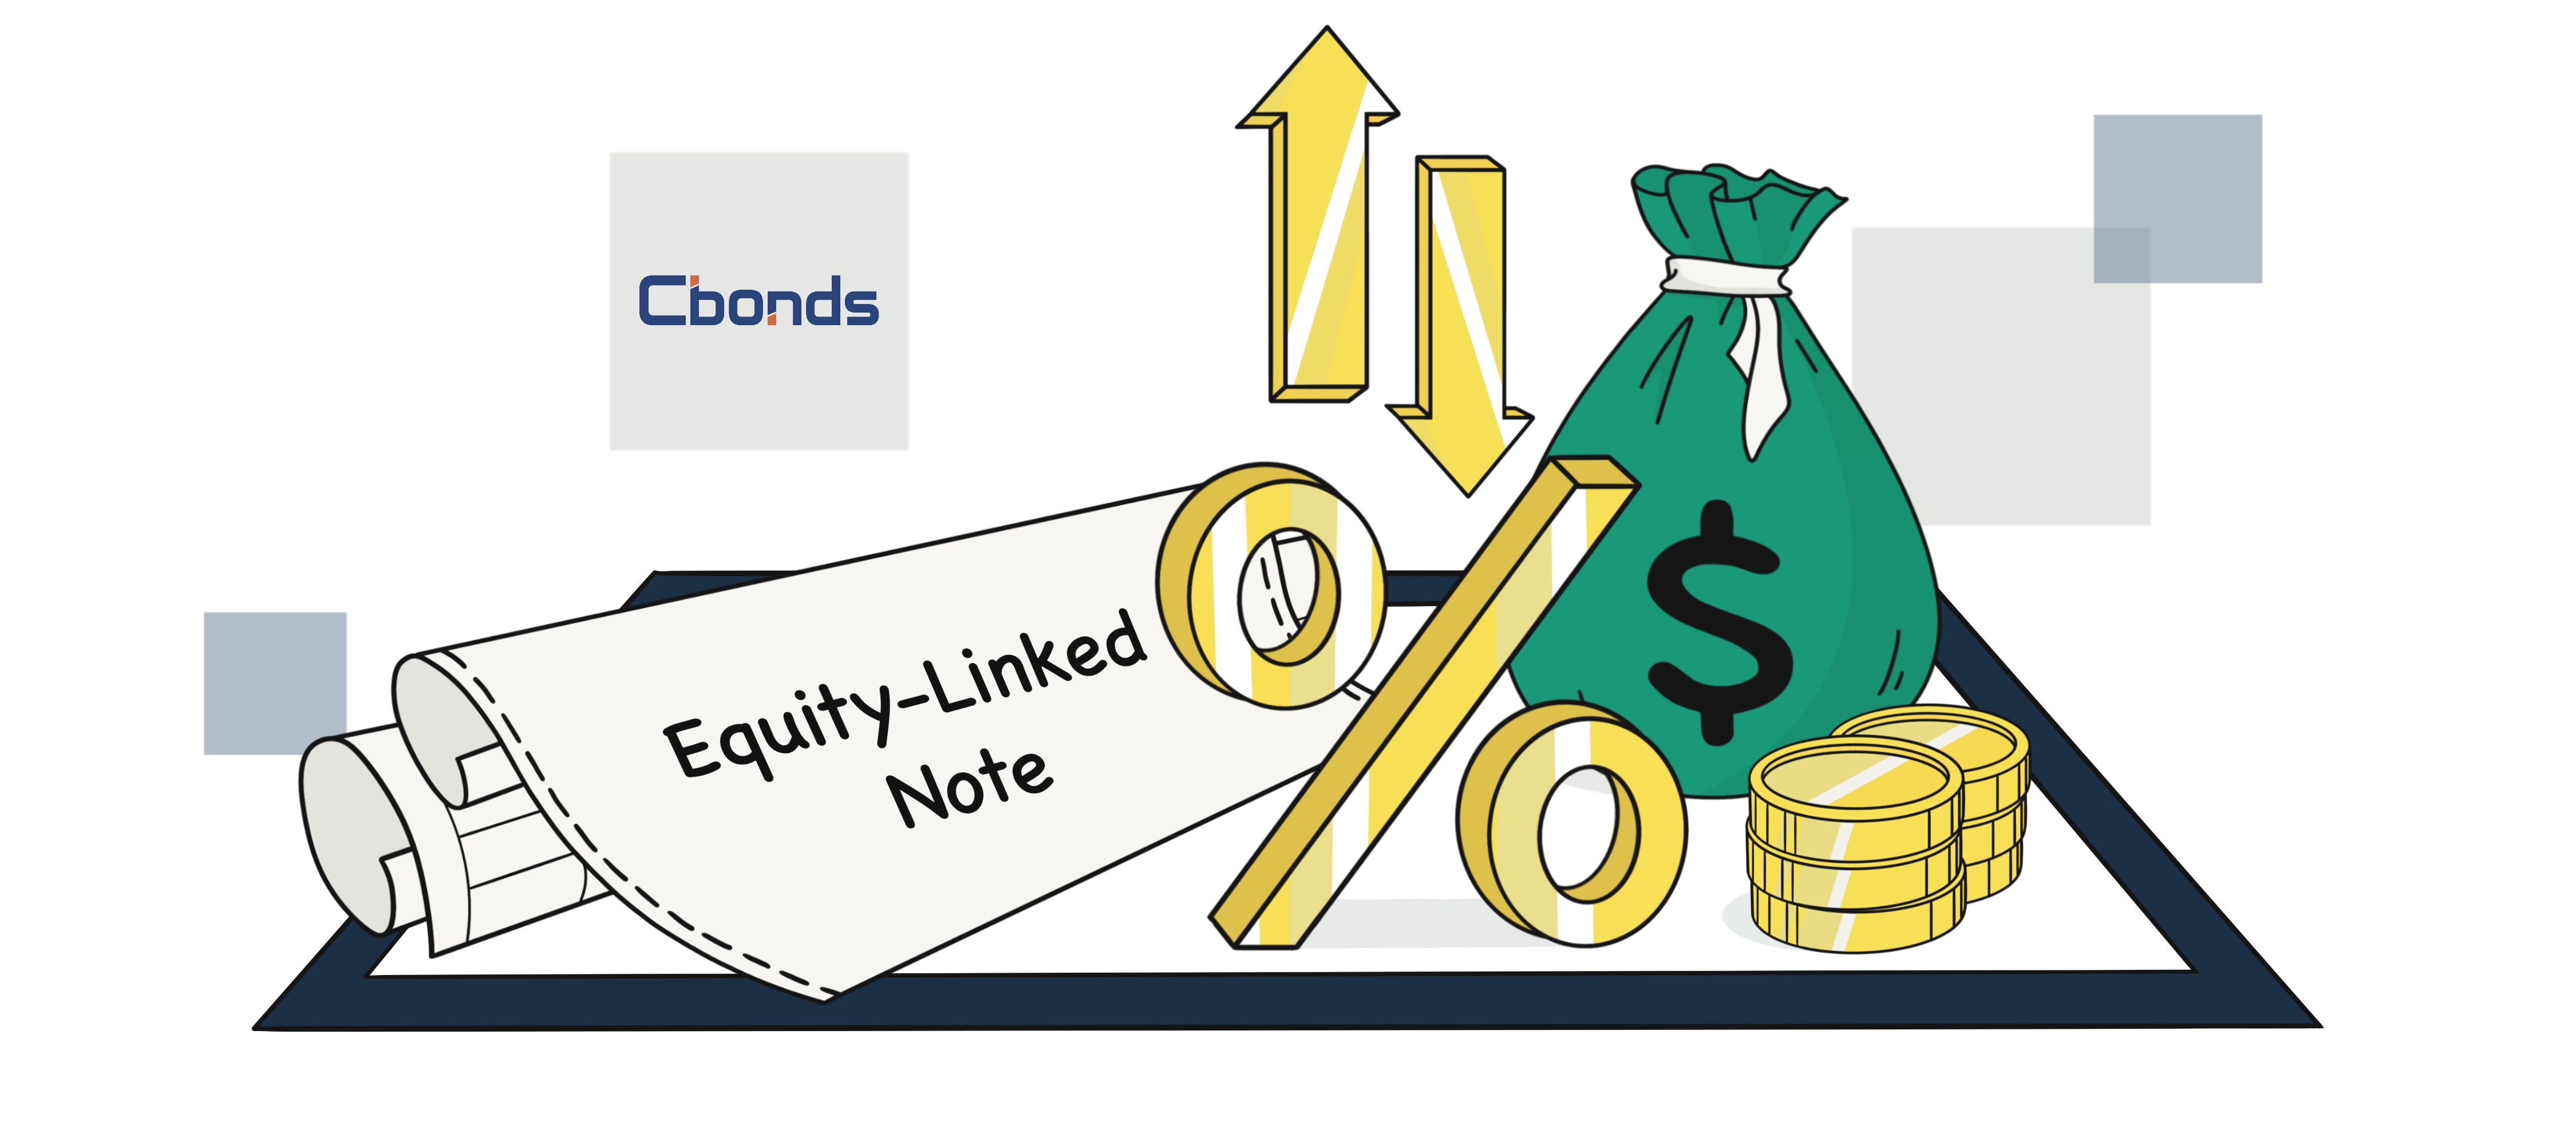 Equity-Linked Note